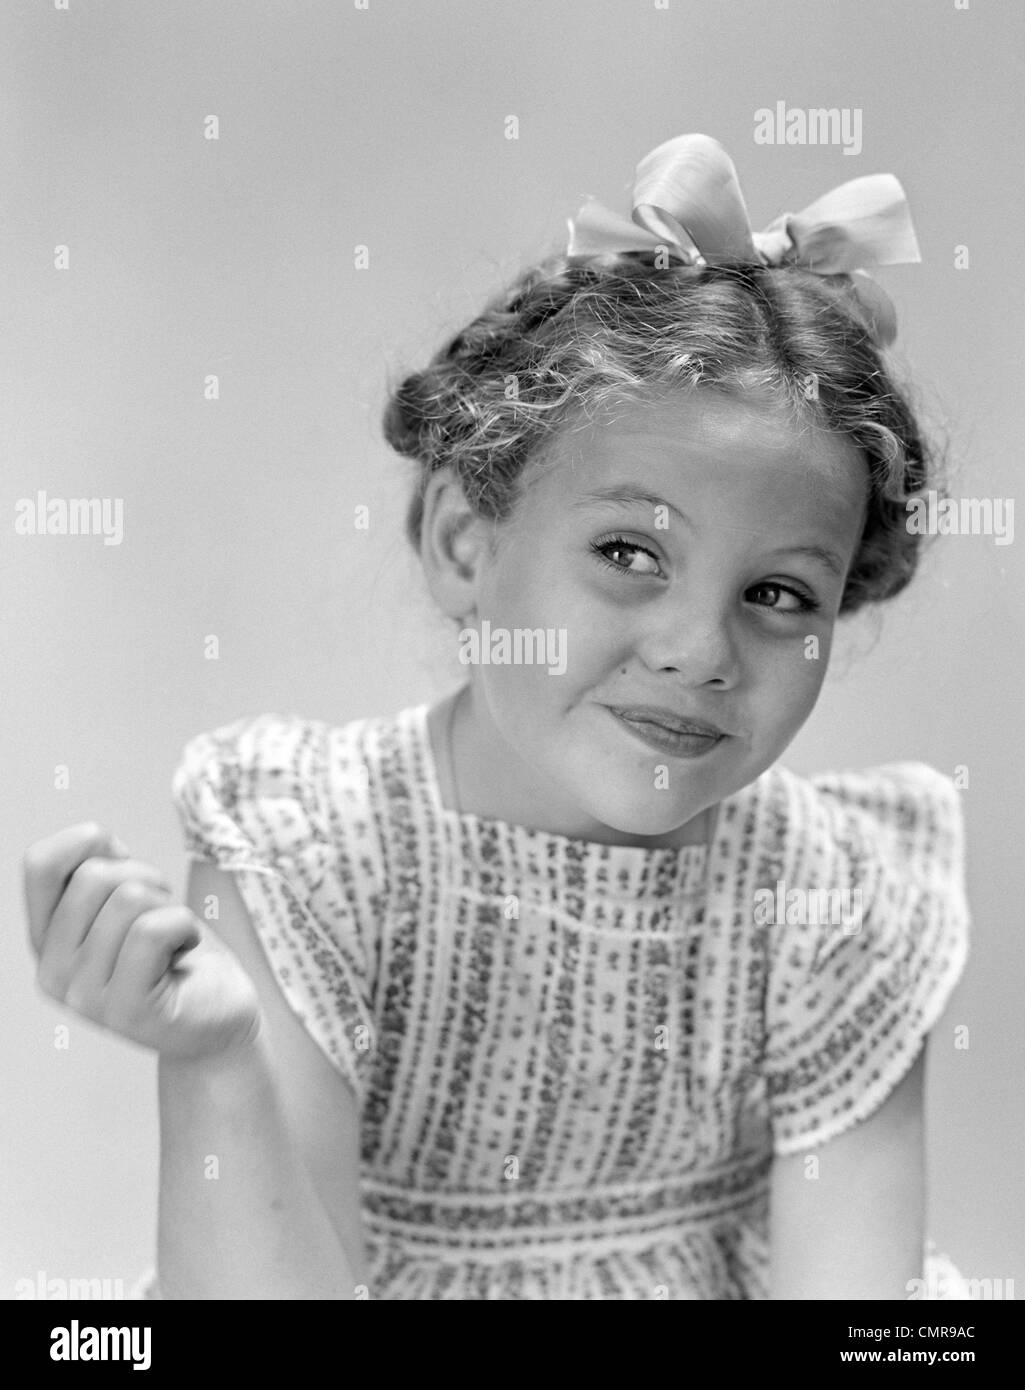 1940s LITTLE GIRL SMILING SMIRKING LOOKING OFF TO ONE SIDE Stock Photo